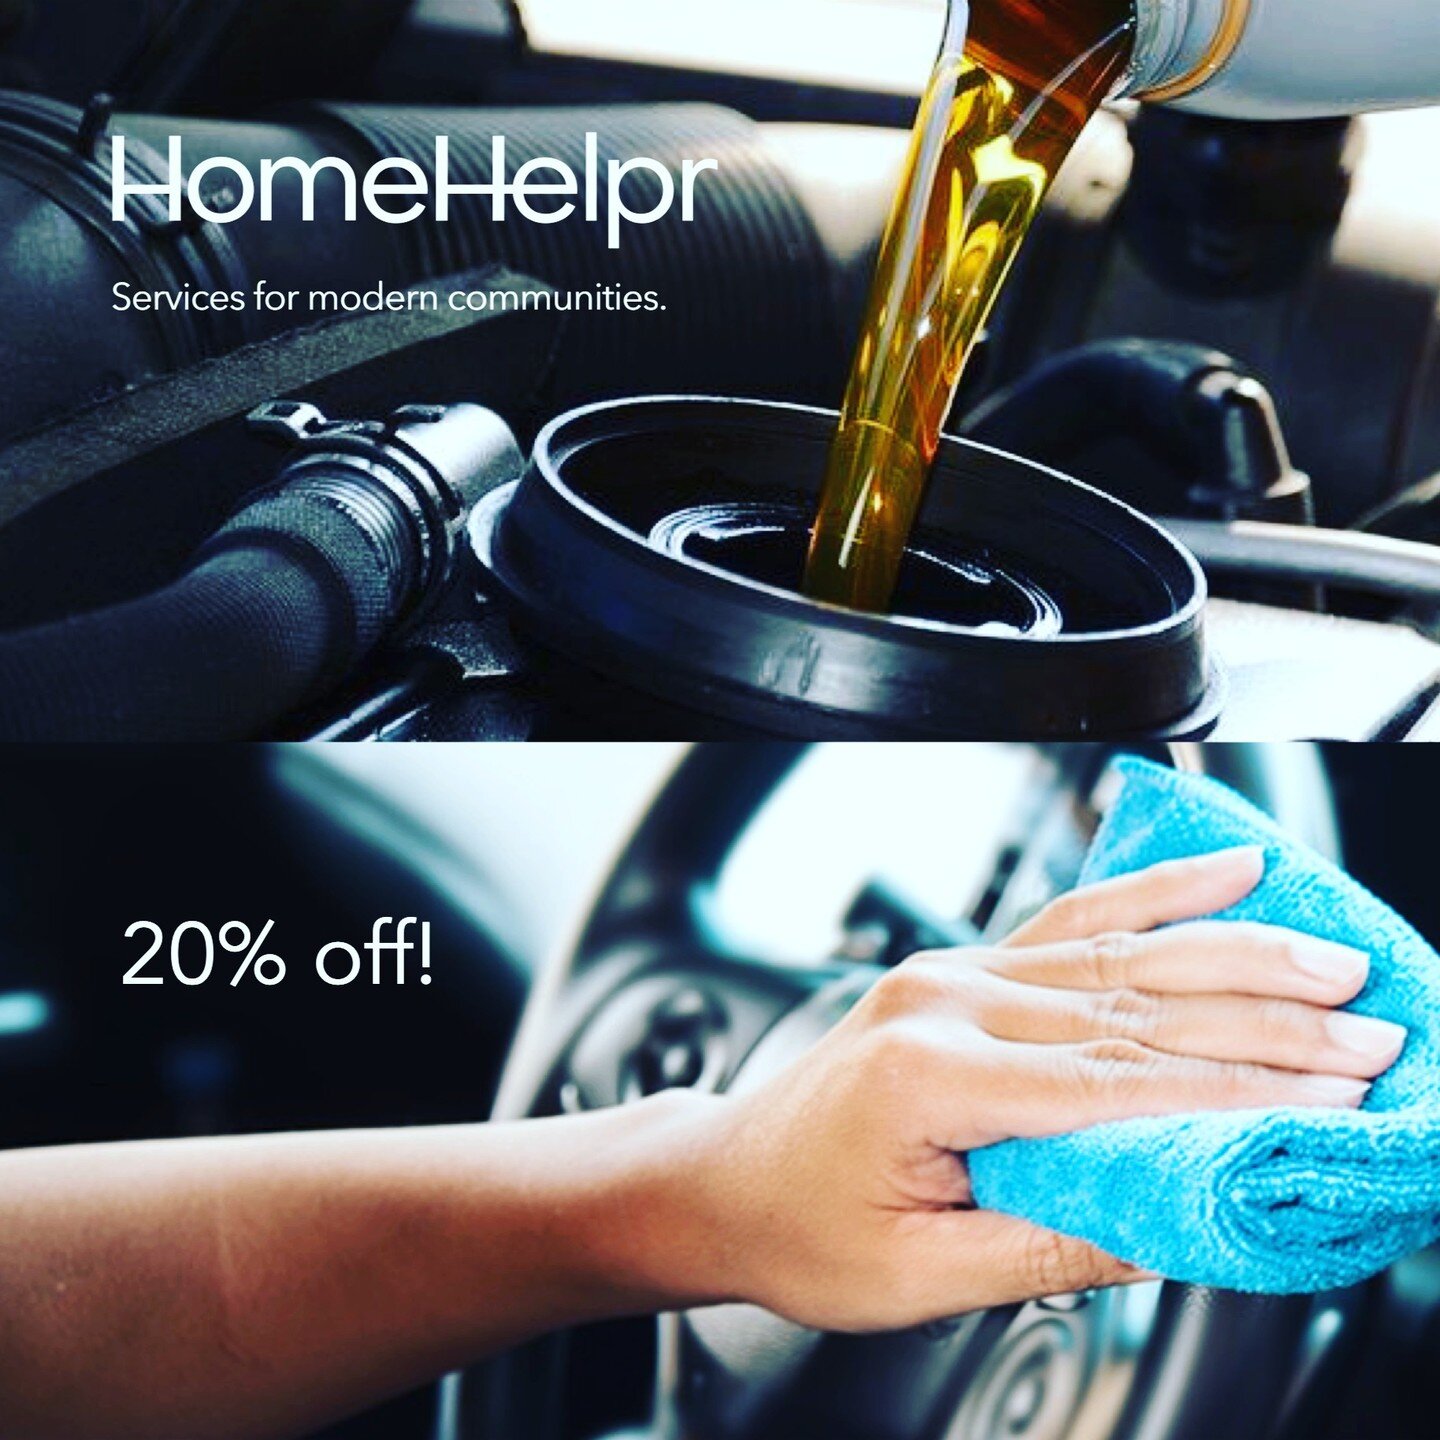 It's a new year and we know your car's maintenance &amp; cleanliness were not your top priority in 2021, but we can make it ours for 2022! Until Feb 15 get 20% off these light car services and stay home while we work! #nowaitingrooms #mobileservice #